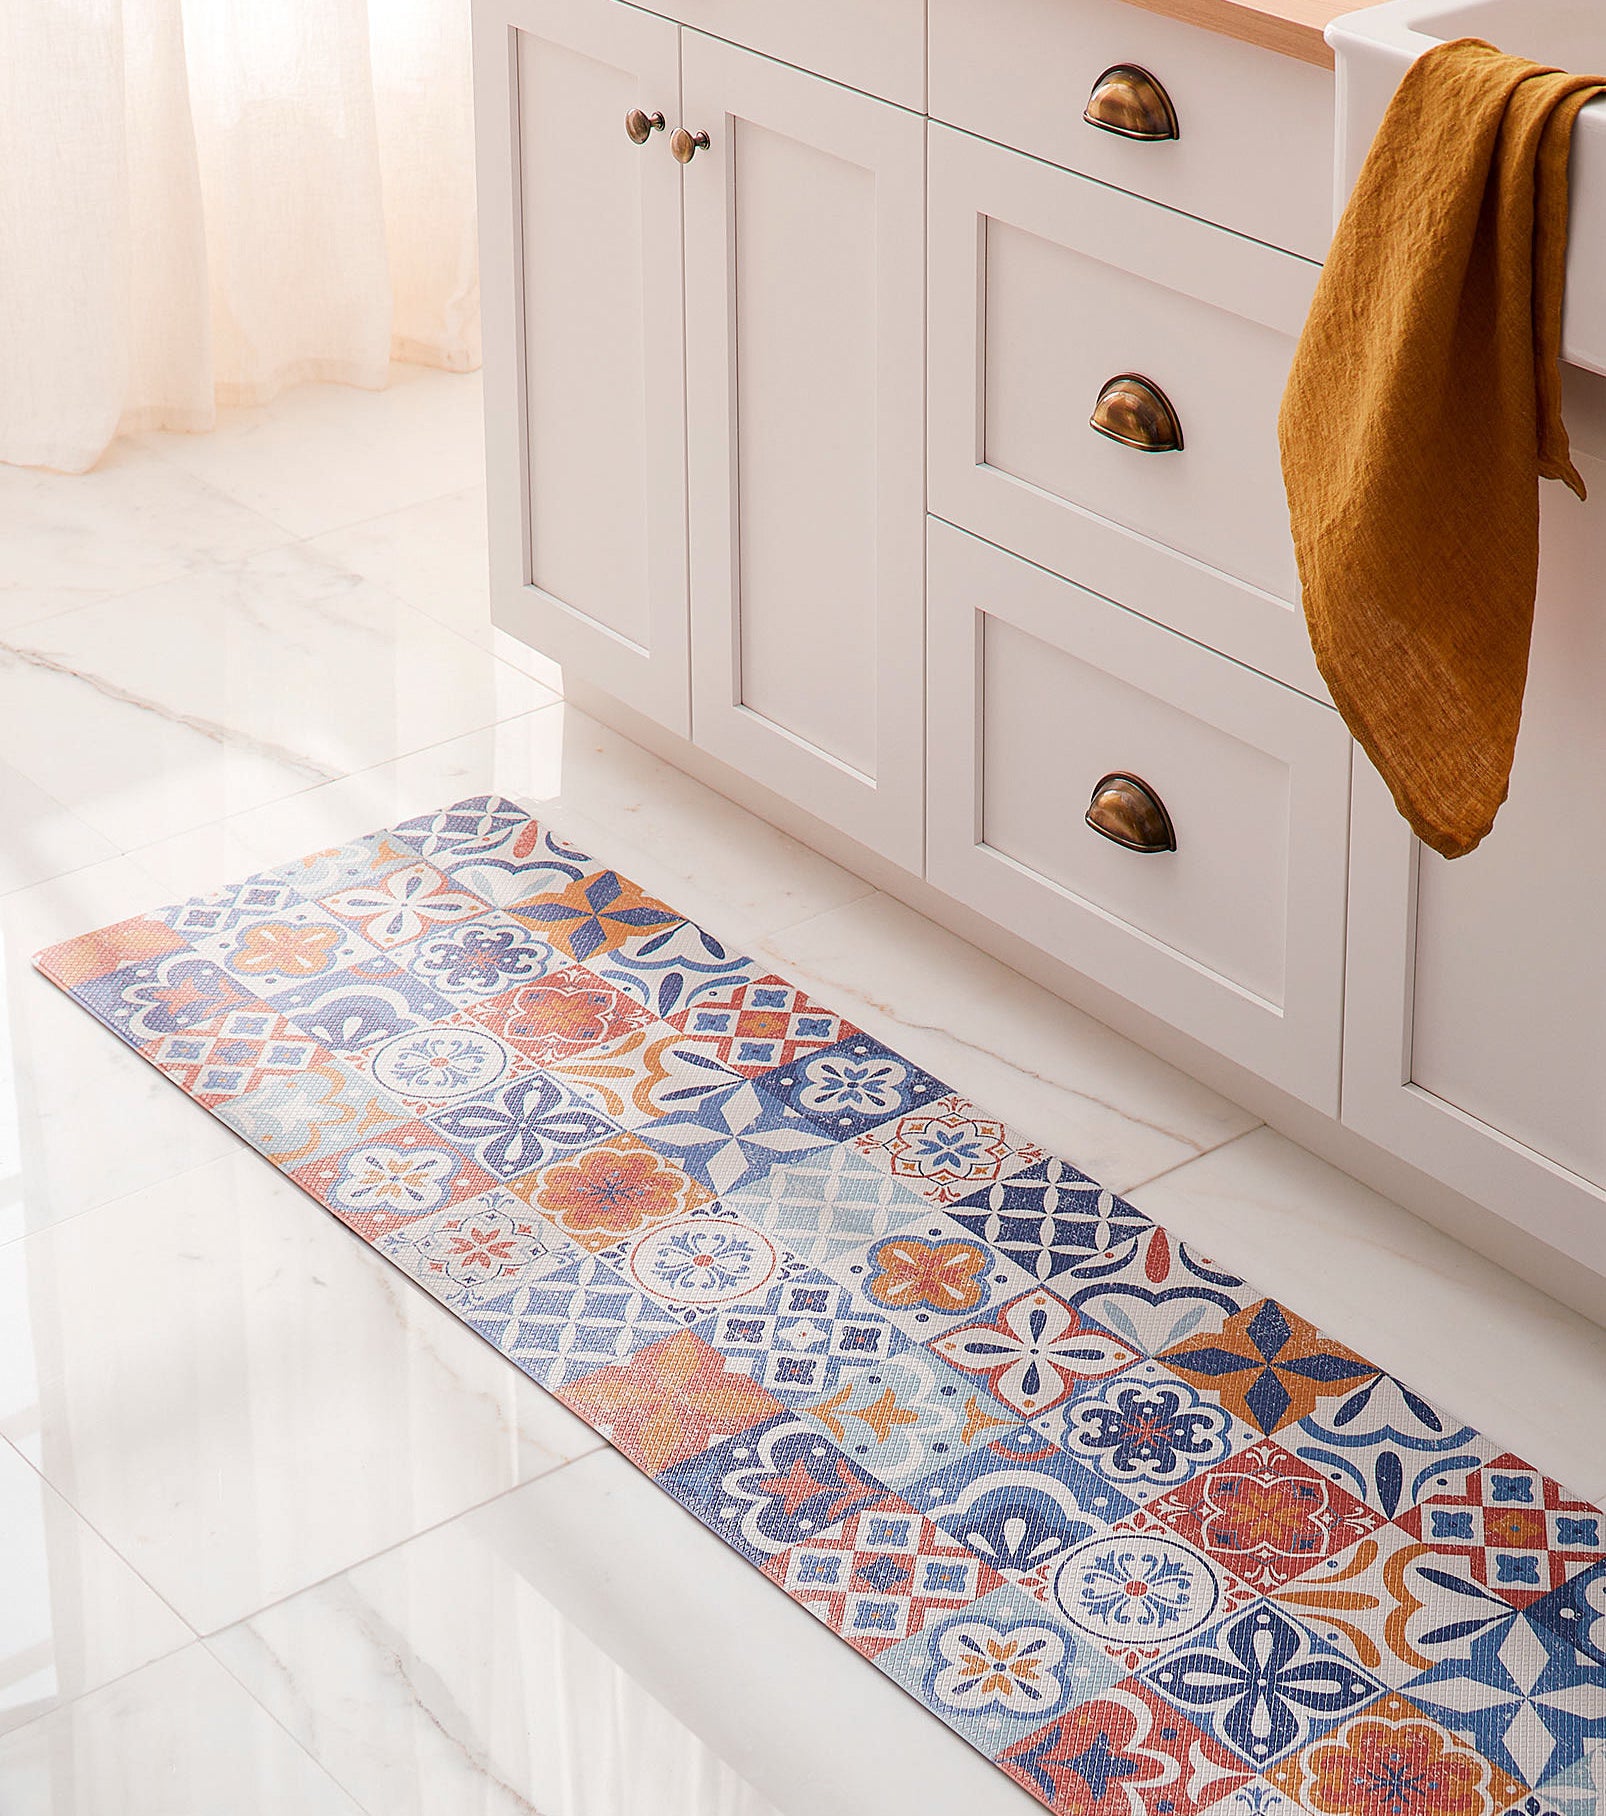 a moroccan-inspired vinyl kitchen mat on a tile floor by a sink